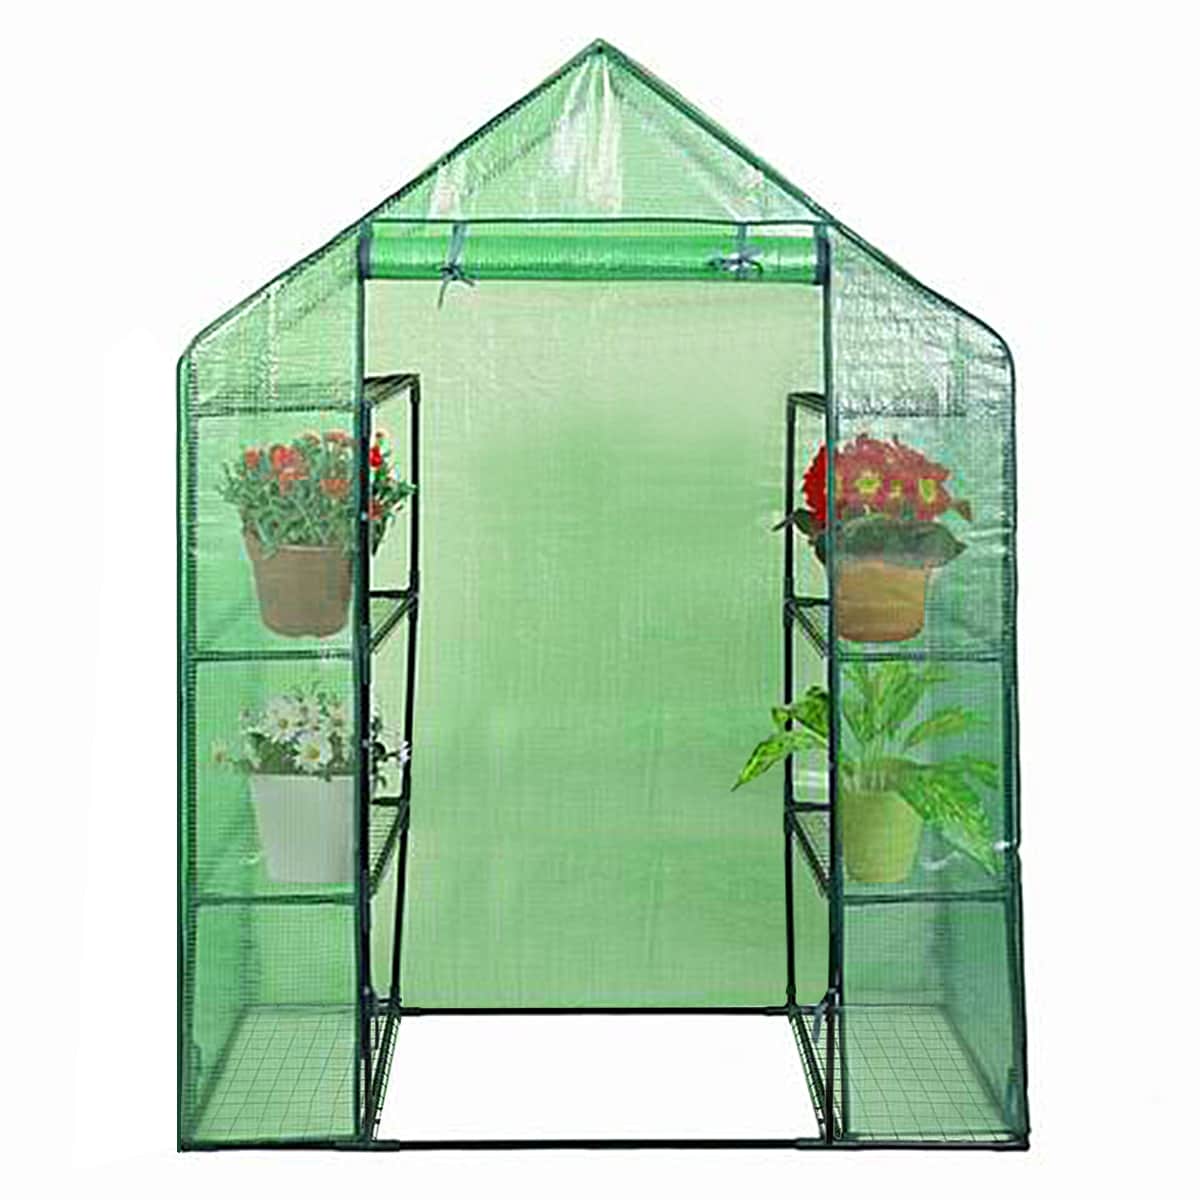 3 Tier Garden Greenhouse Mini Portable Plants Greenhouse Cover Plastic PVC Clear Walk-in Grow Green House for Outdoors Garden Plants Flowers